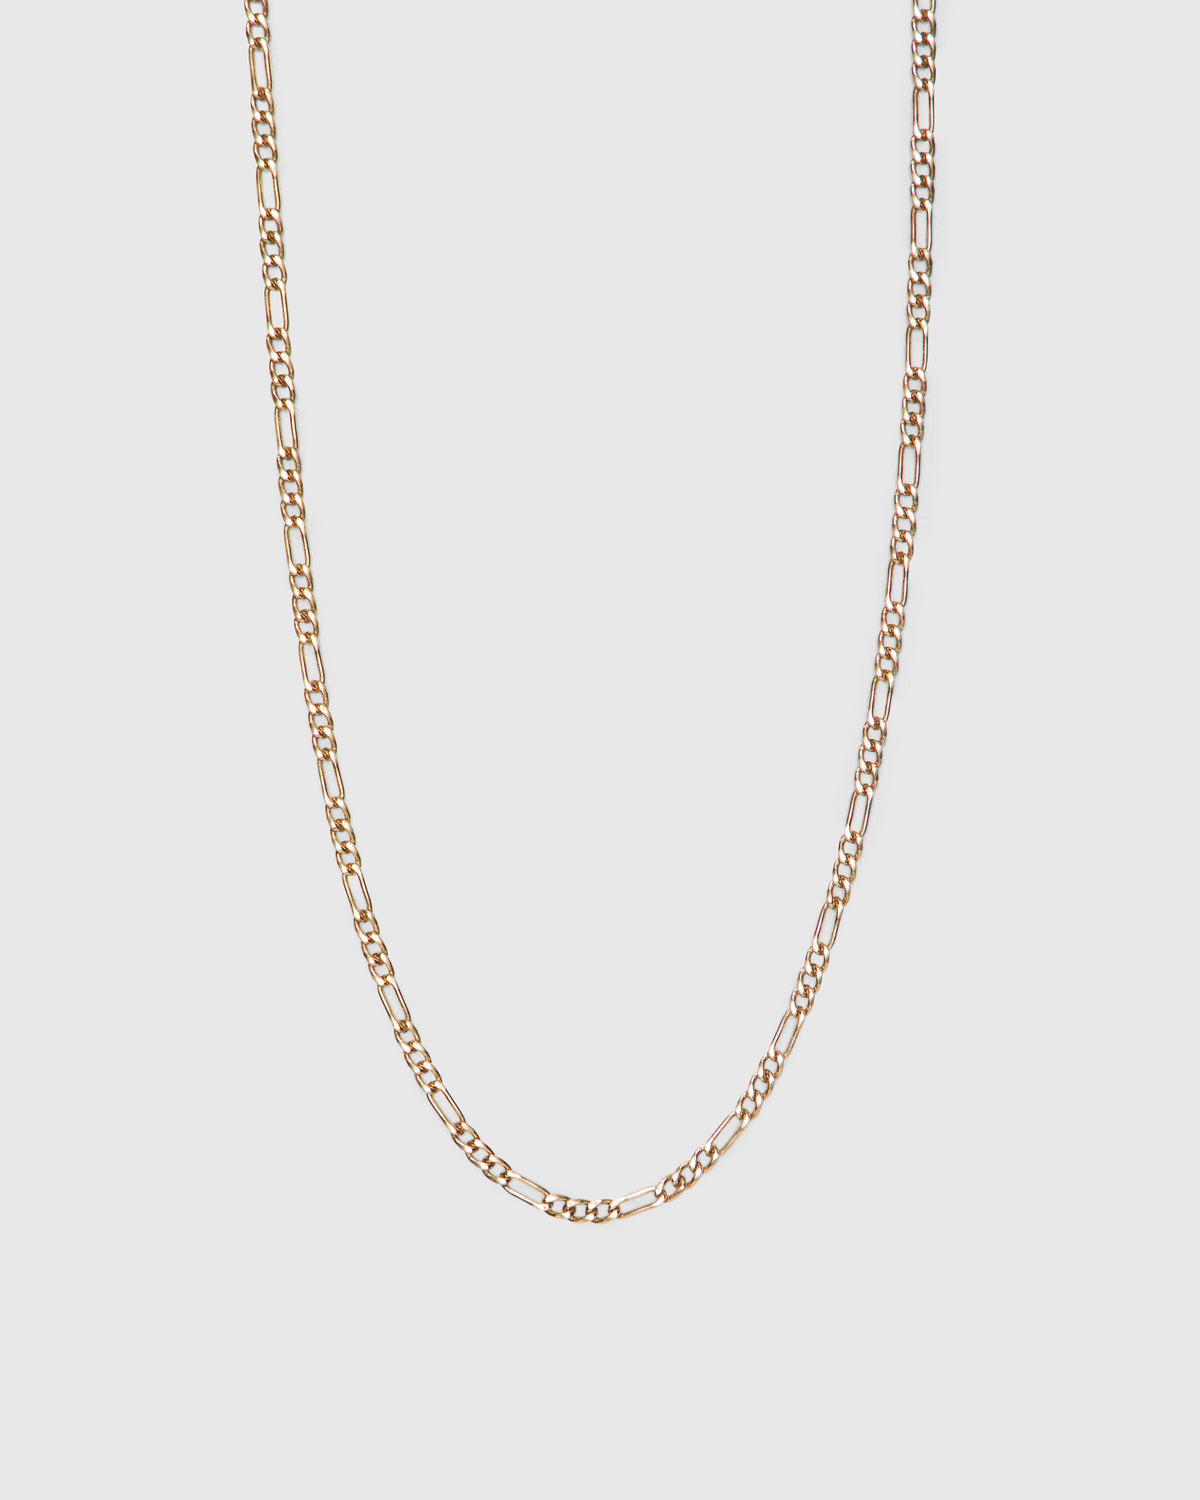 Figaro Chain in 14K Gold Filled